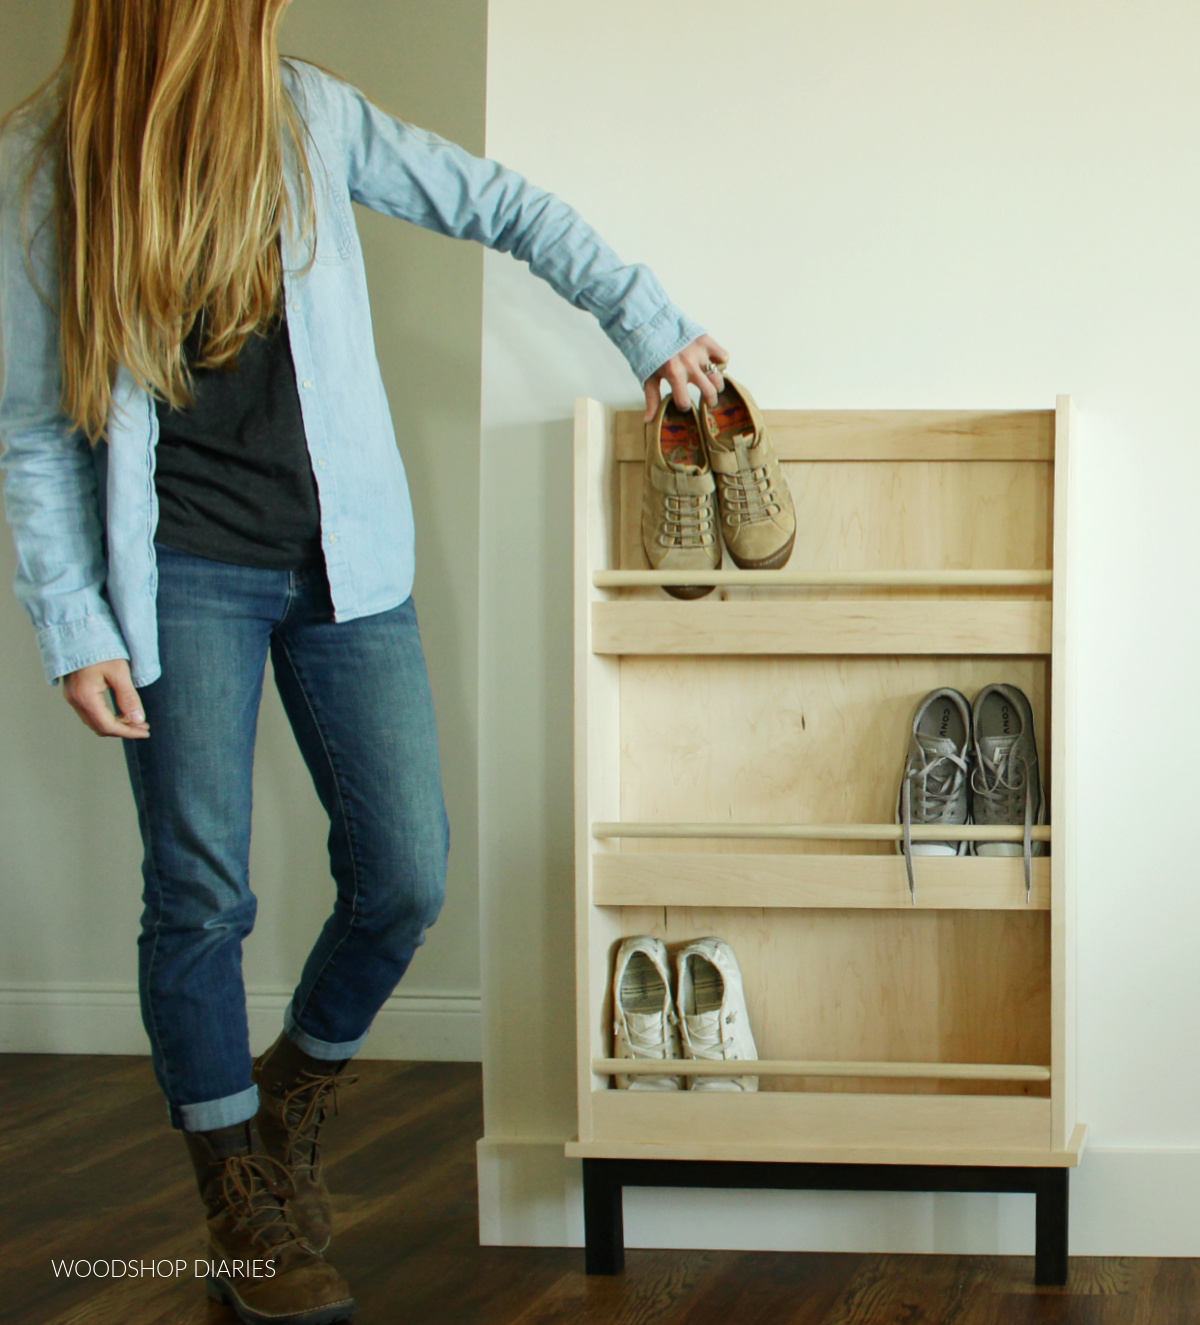 Shara Woodshop Diaries placing shoes in wooden shoe rack